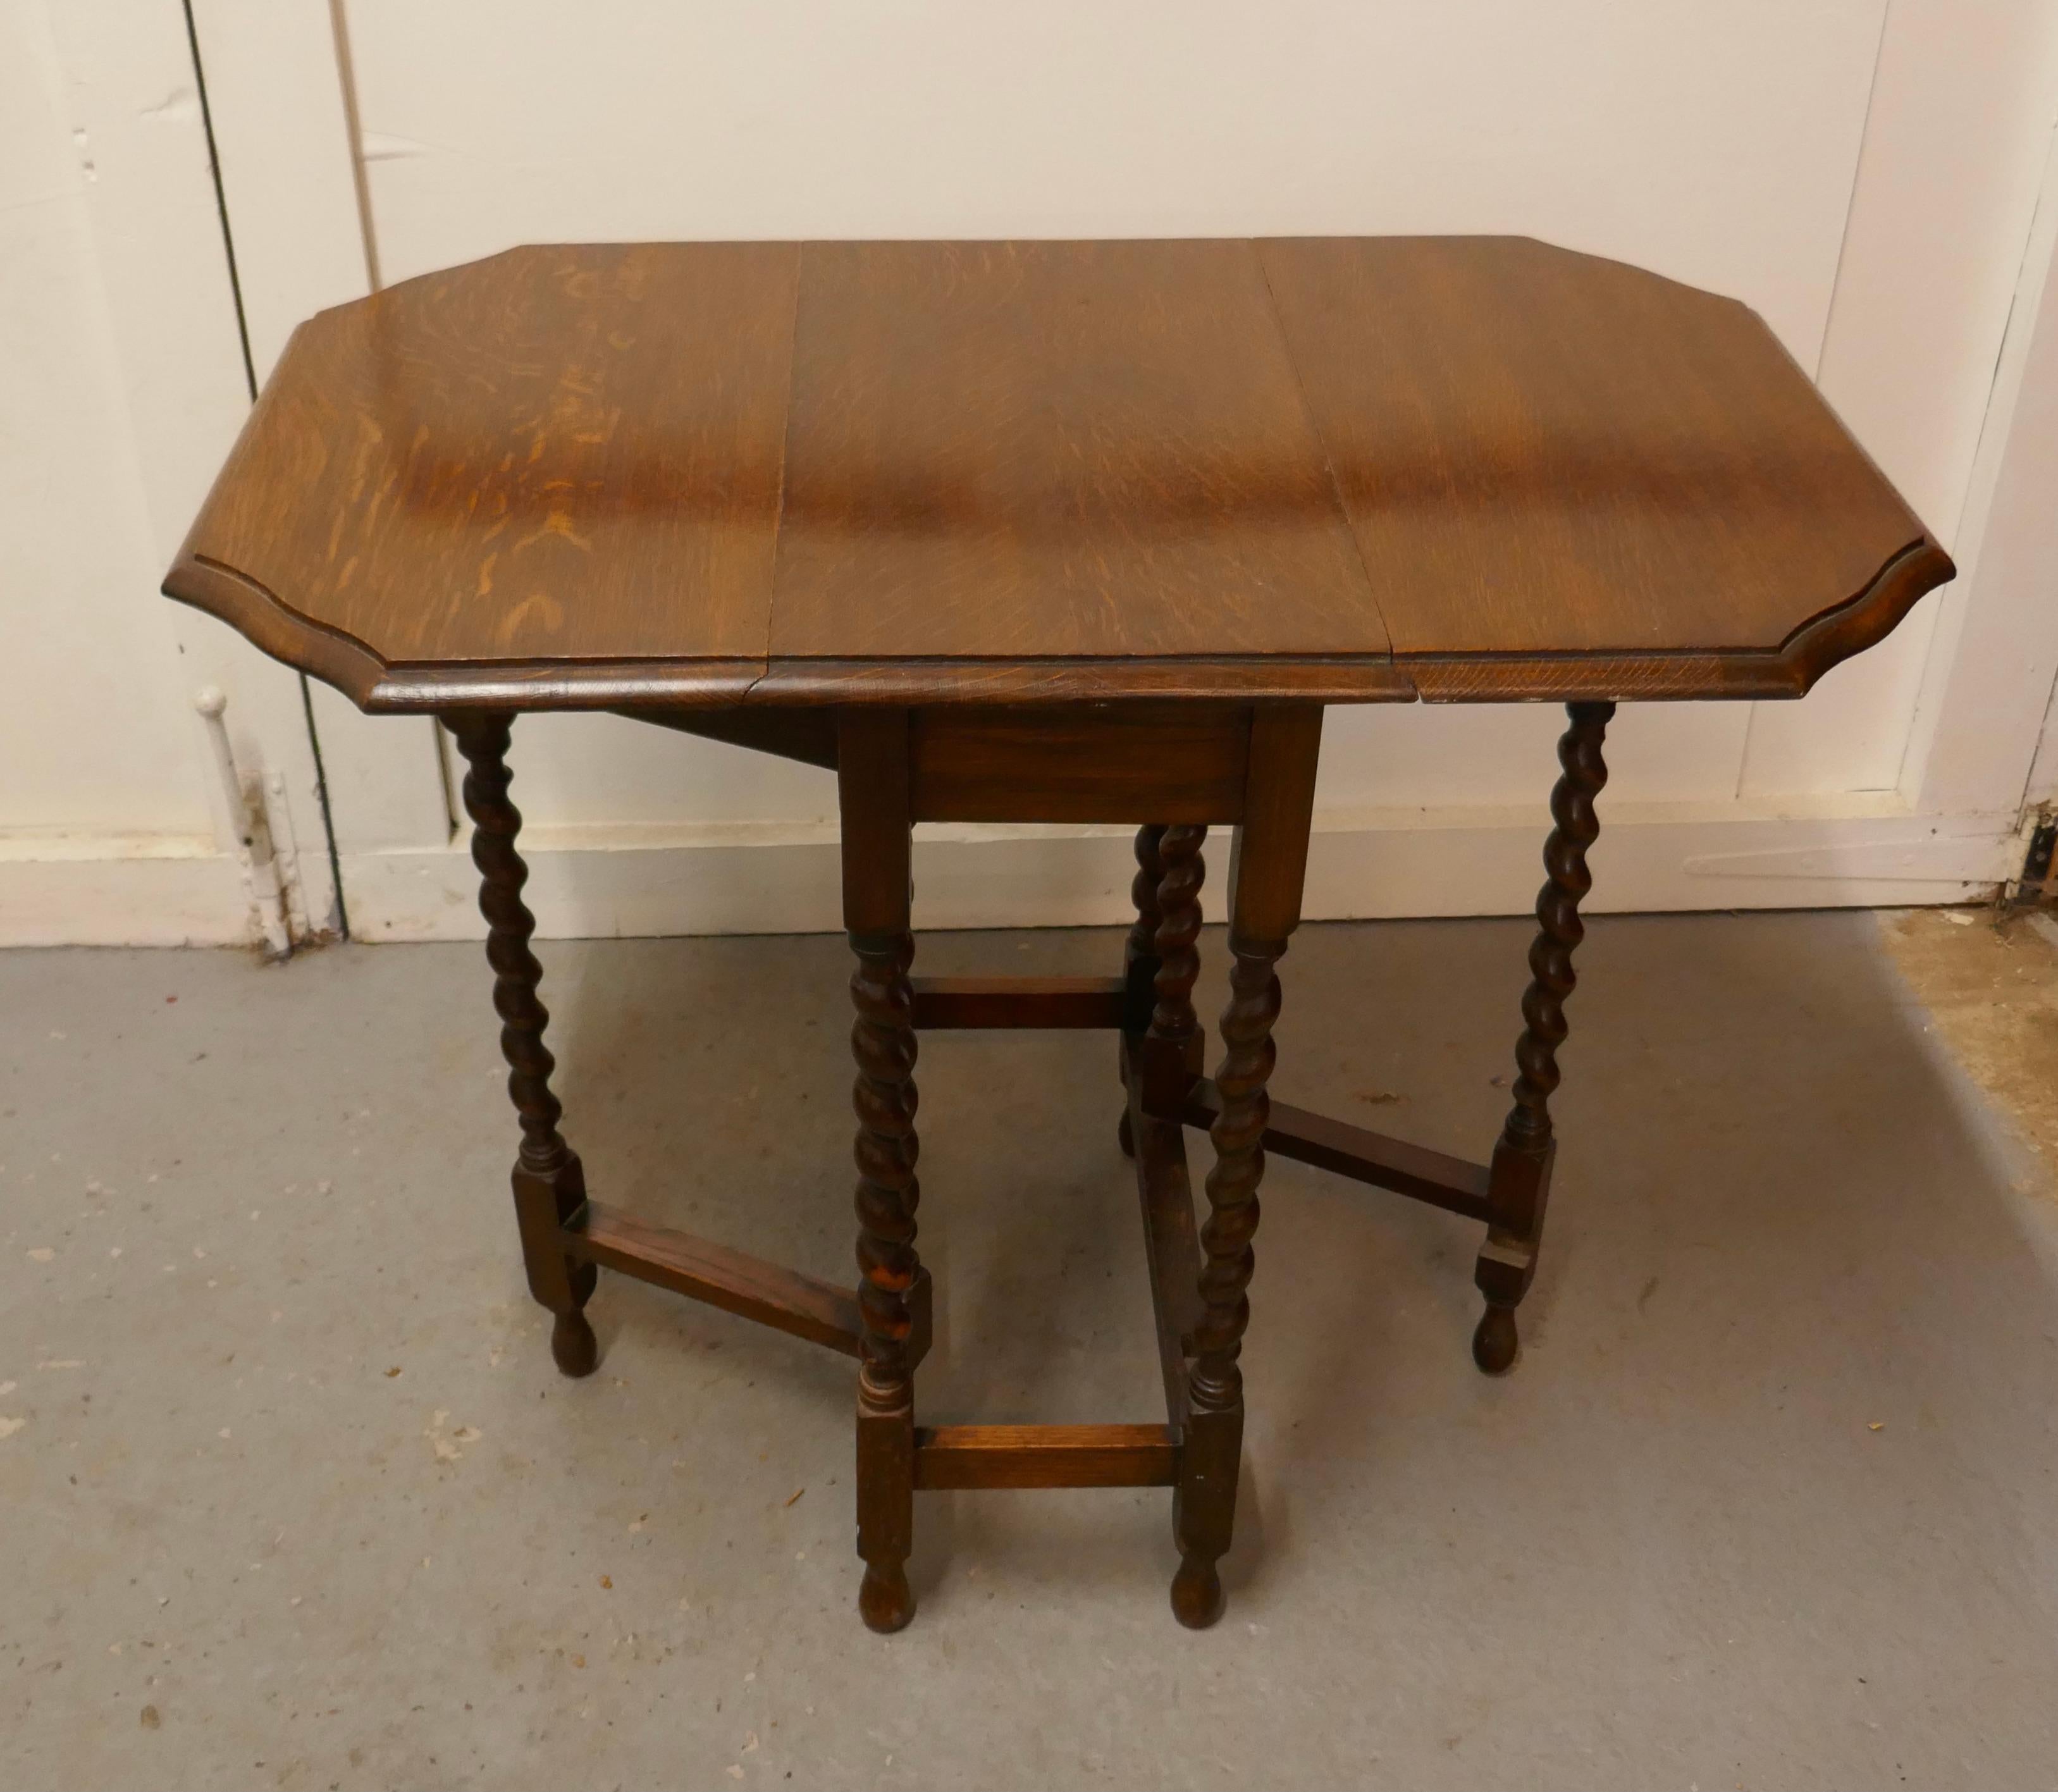 This is a Good Solid Oak Victorian Gate Leg Table 3